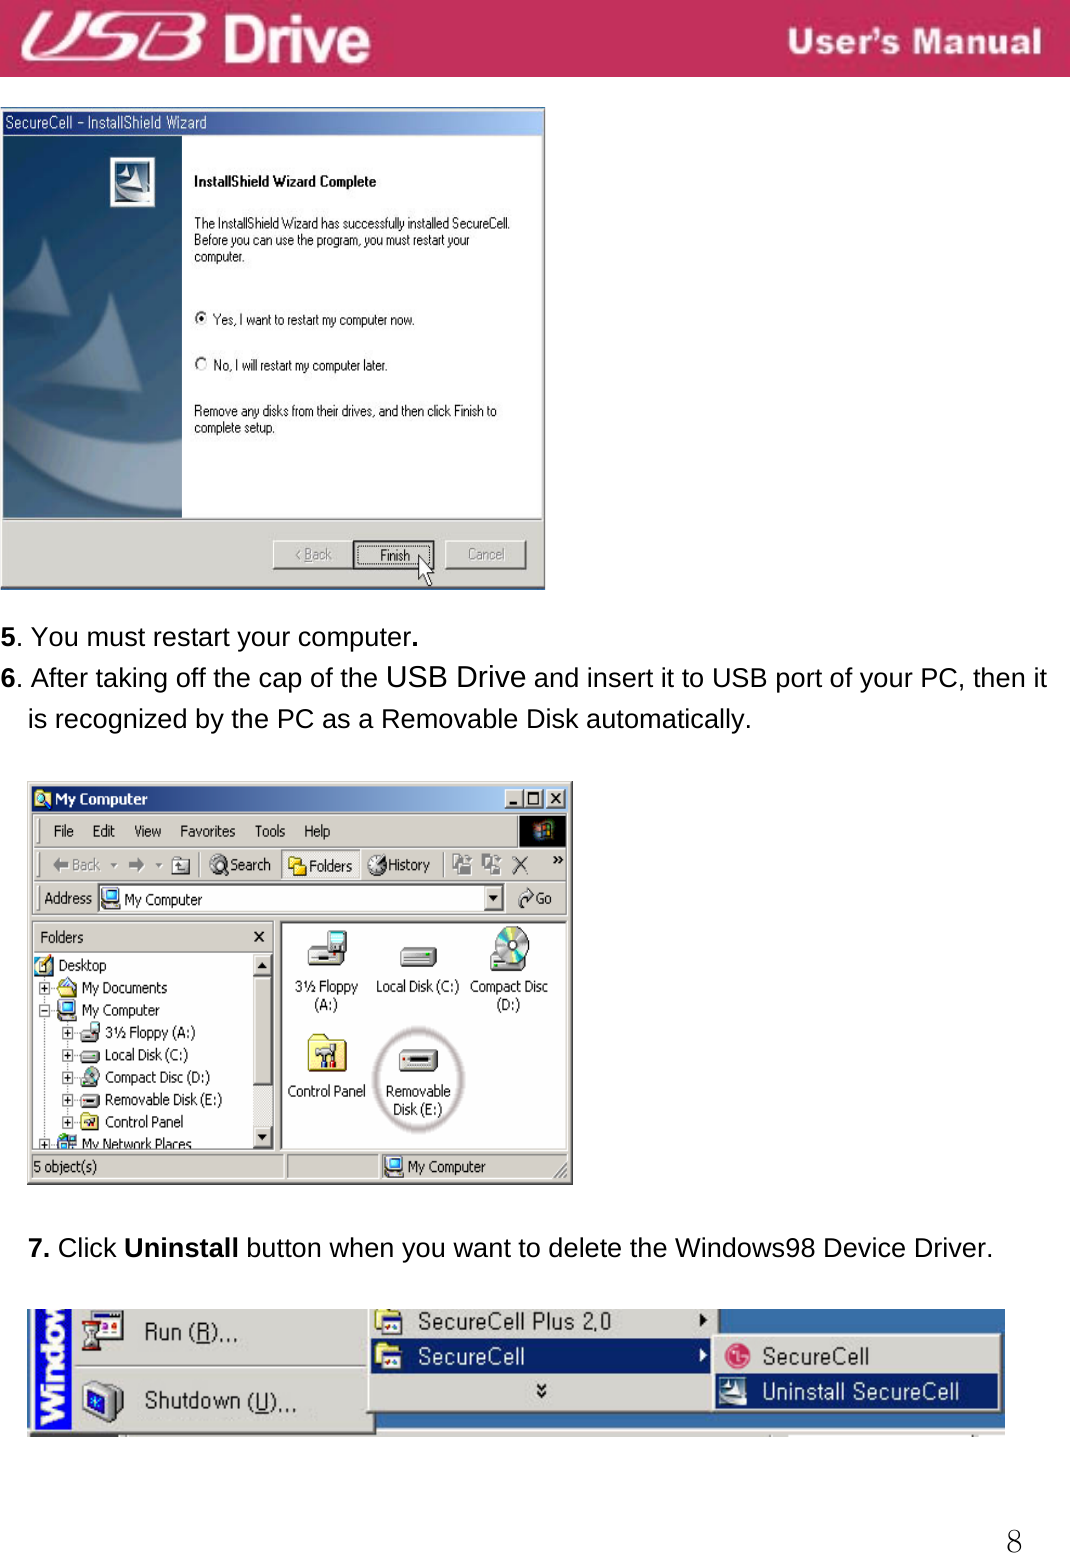  8    5. You must restart your computer. 6. After taking off the cap of the USB Drive and insert it to USB port of your PC, then it is recognized by the PC as a Removable Disk automatically.    7. Click Uninstall button when you want to delete the Windows98 Device Driver.    